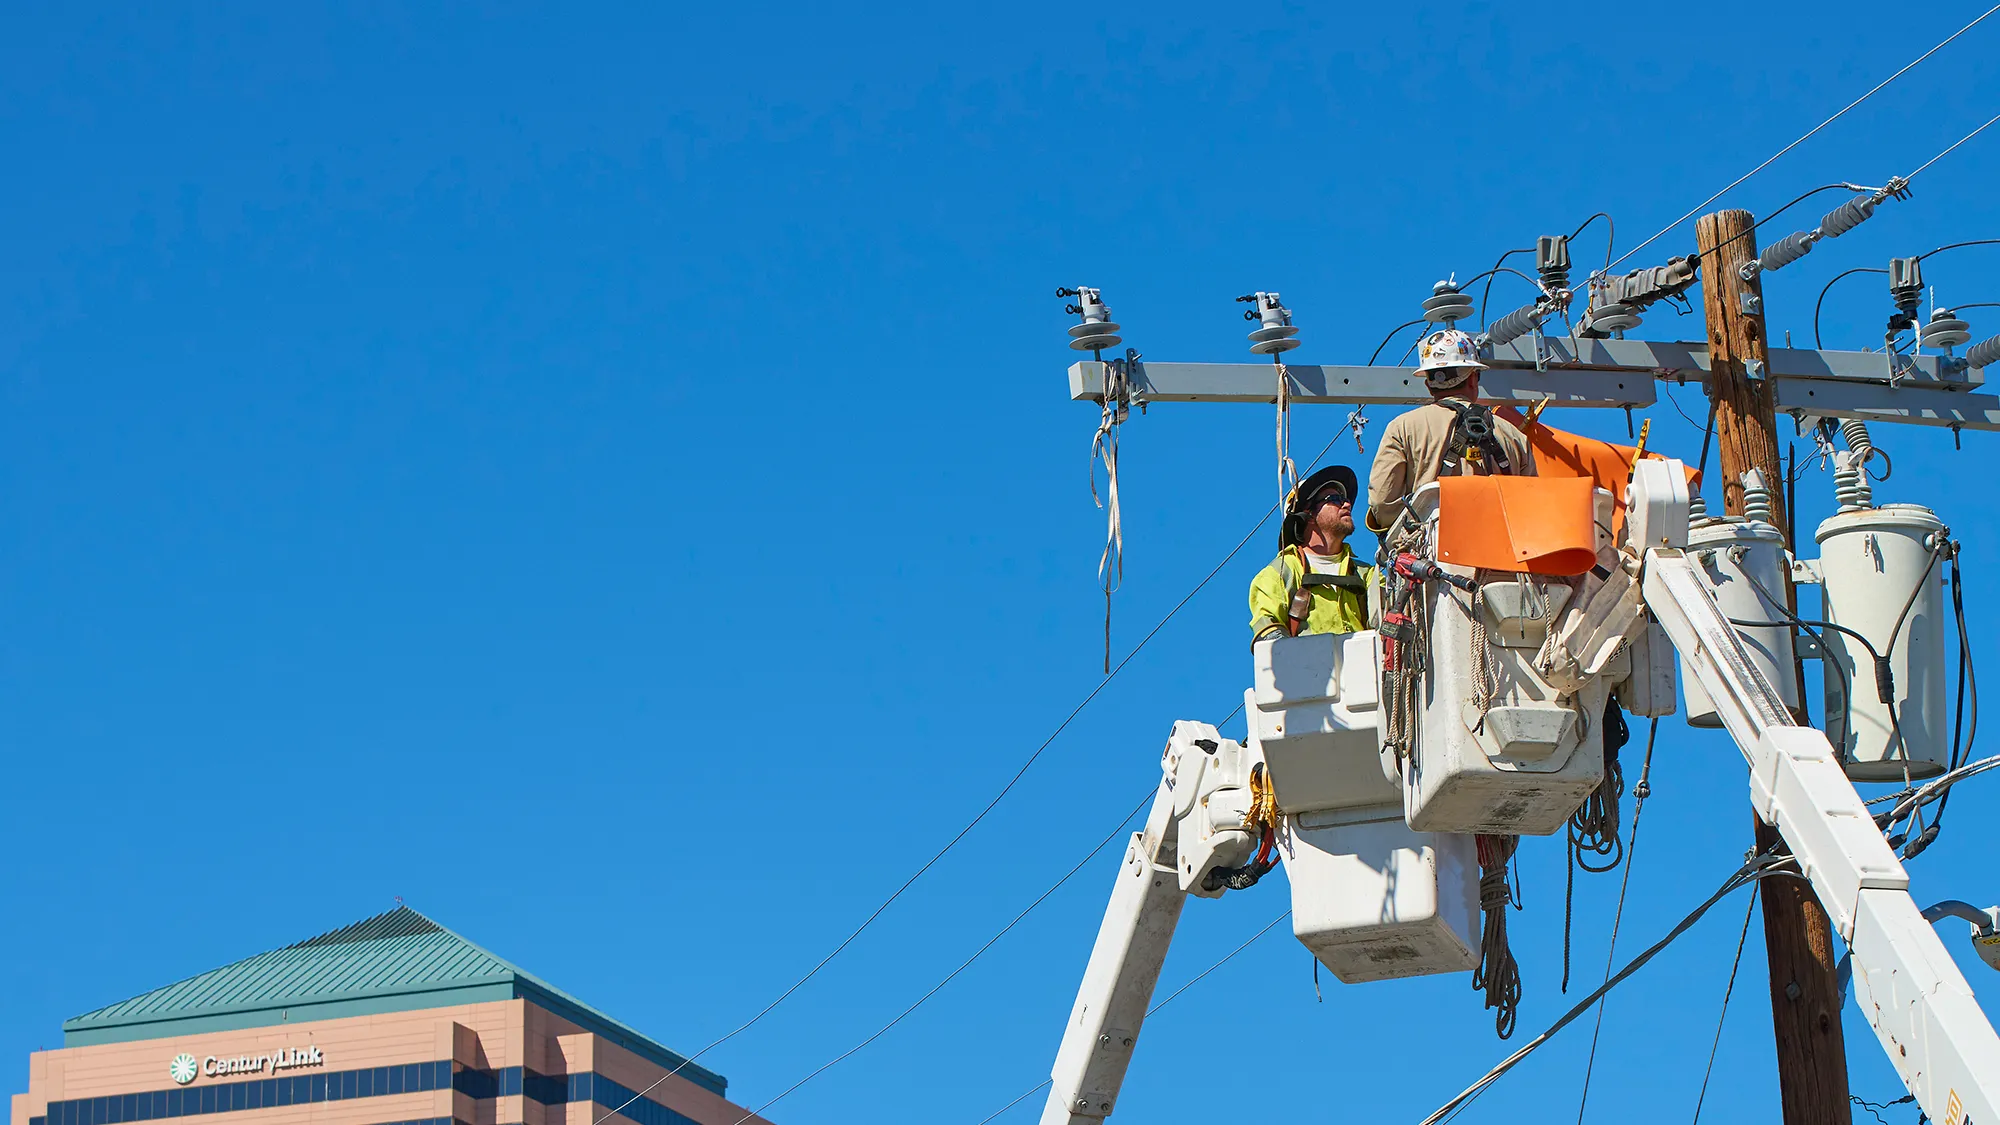 Two National Powerline workers looking at a powerline from a crane.